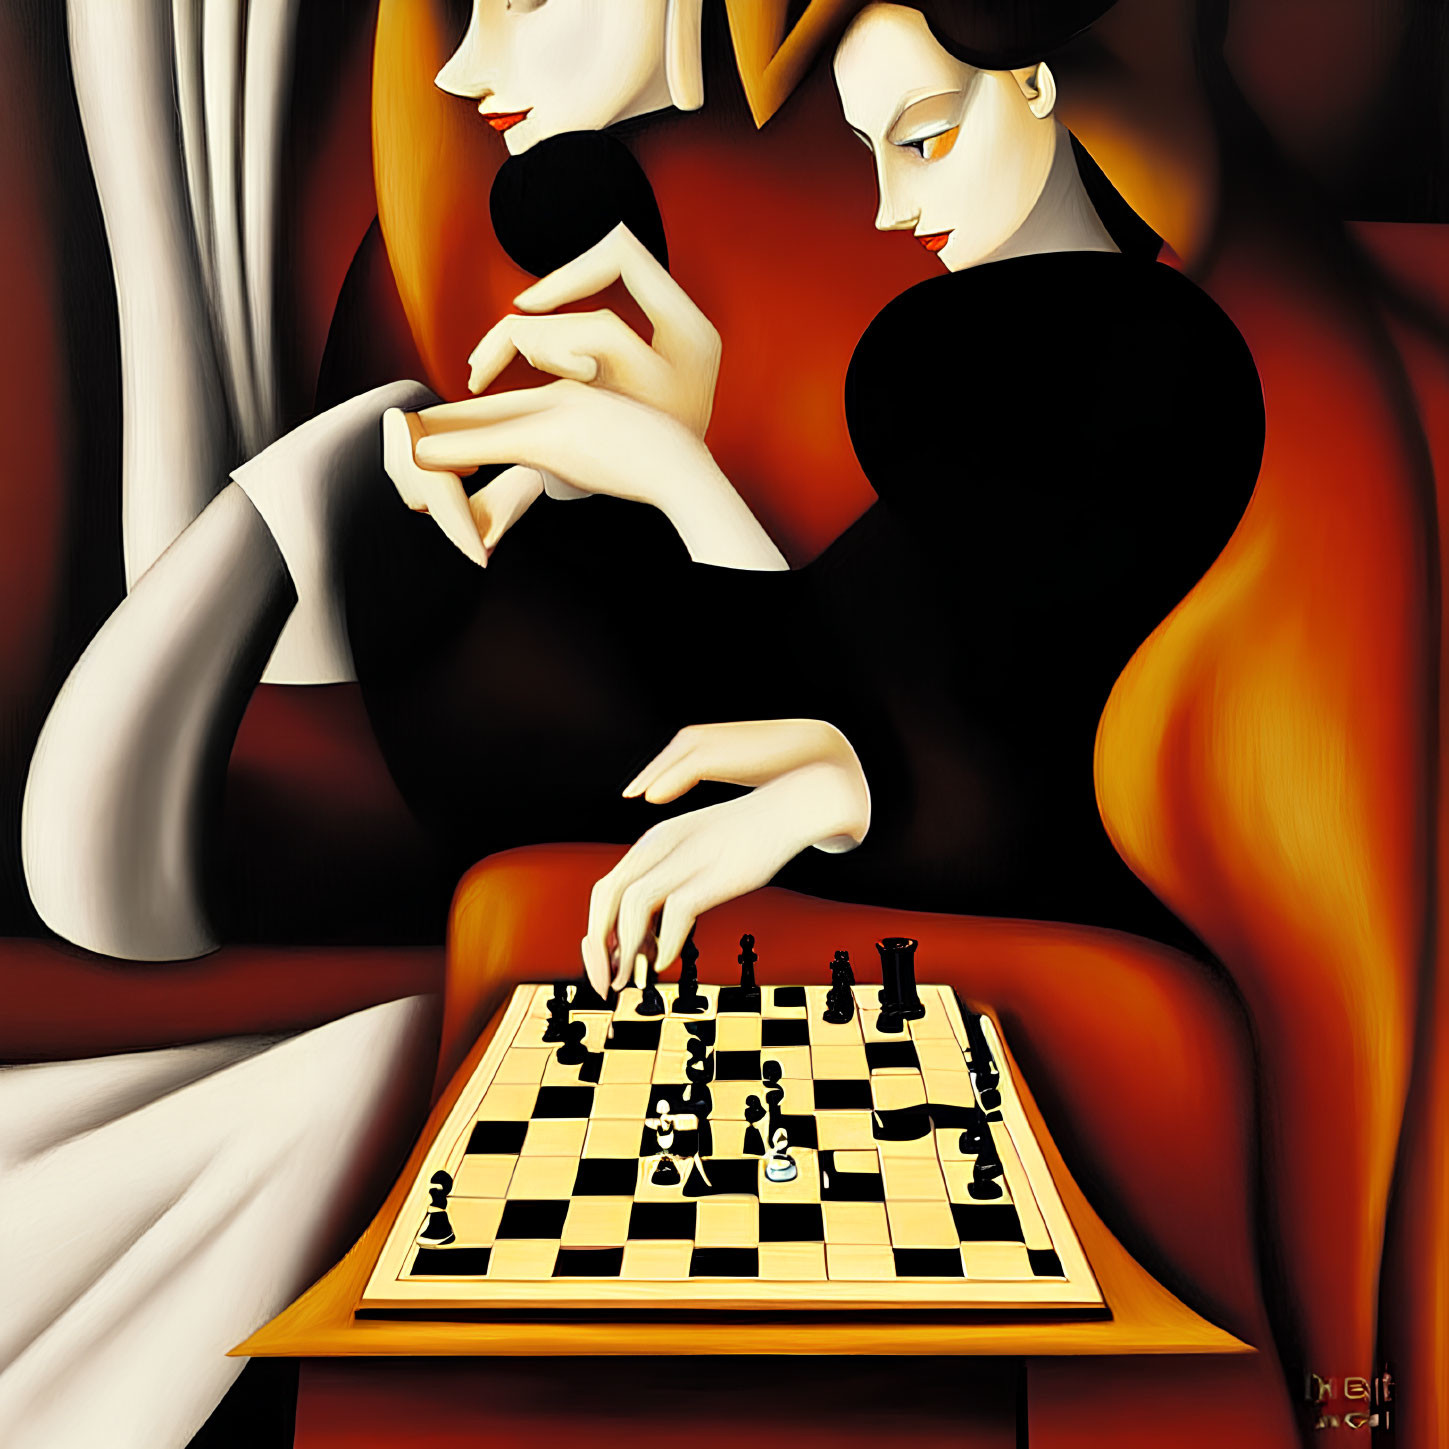 Abstract chess players in elongated style against warm-toned backdrop